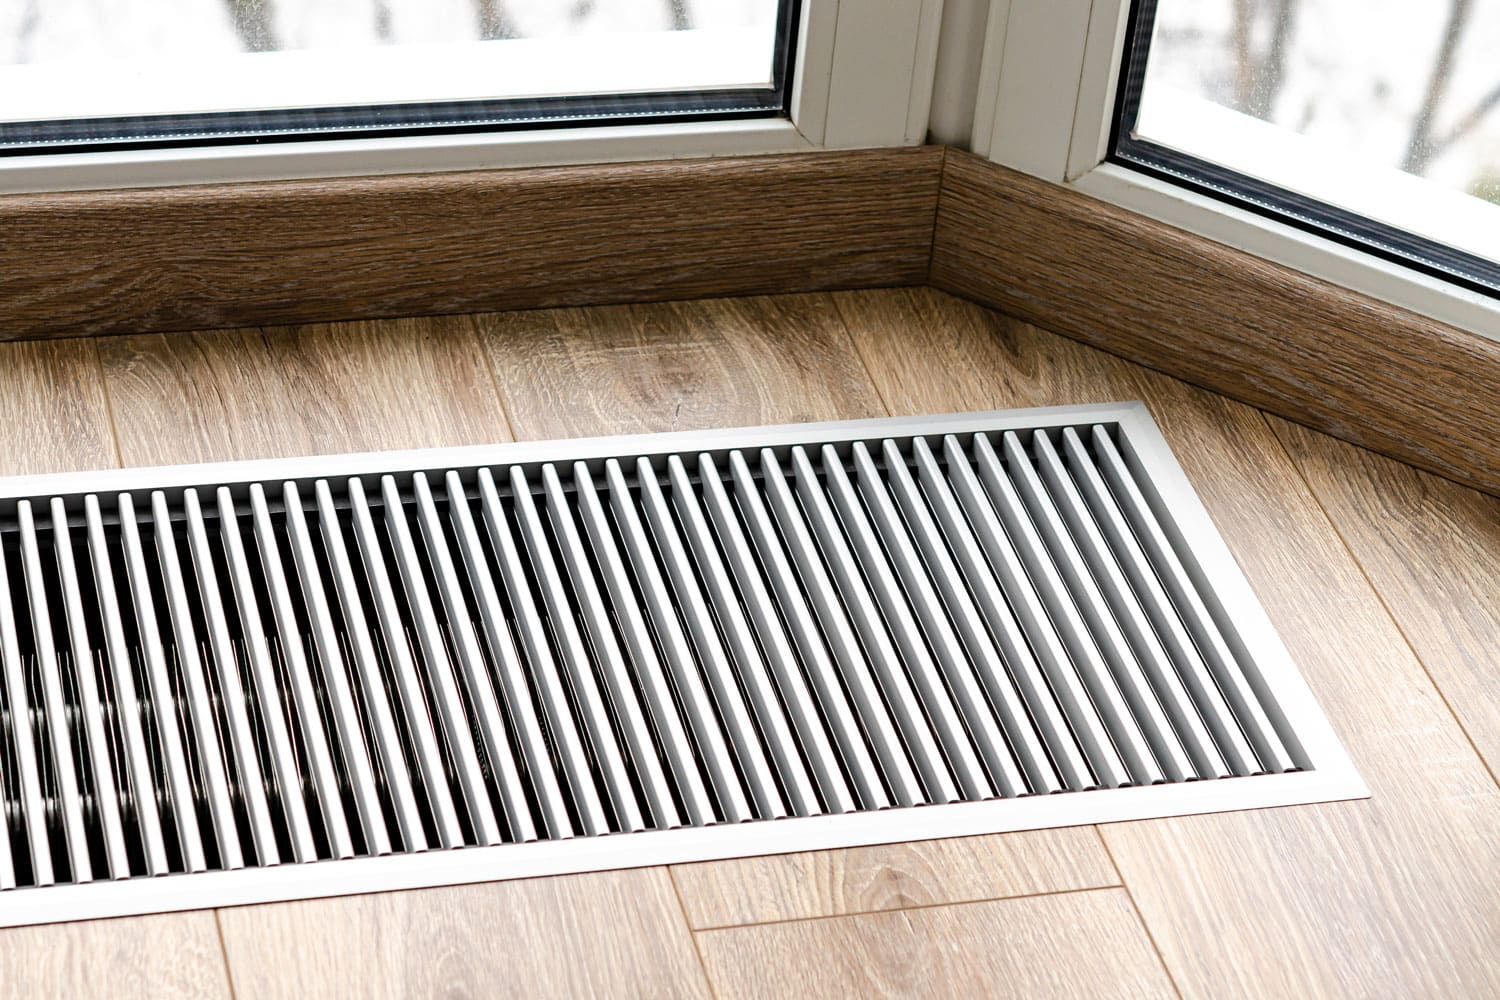 Sealed vent and ducts should have proper air isolation